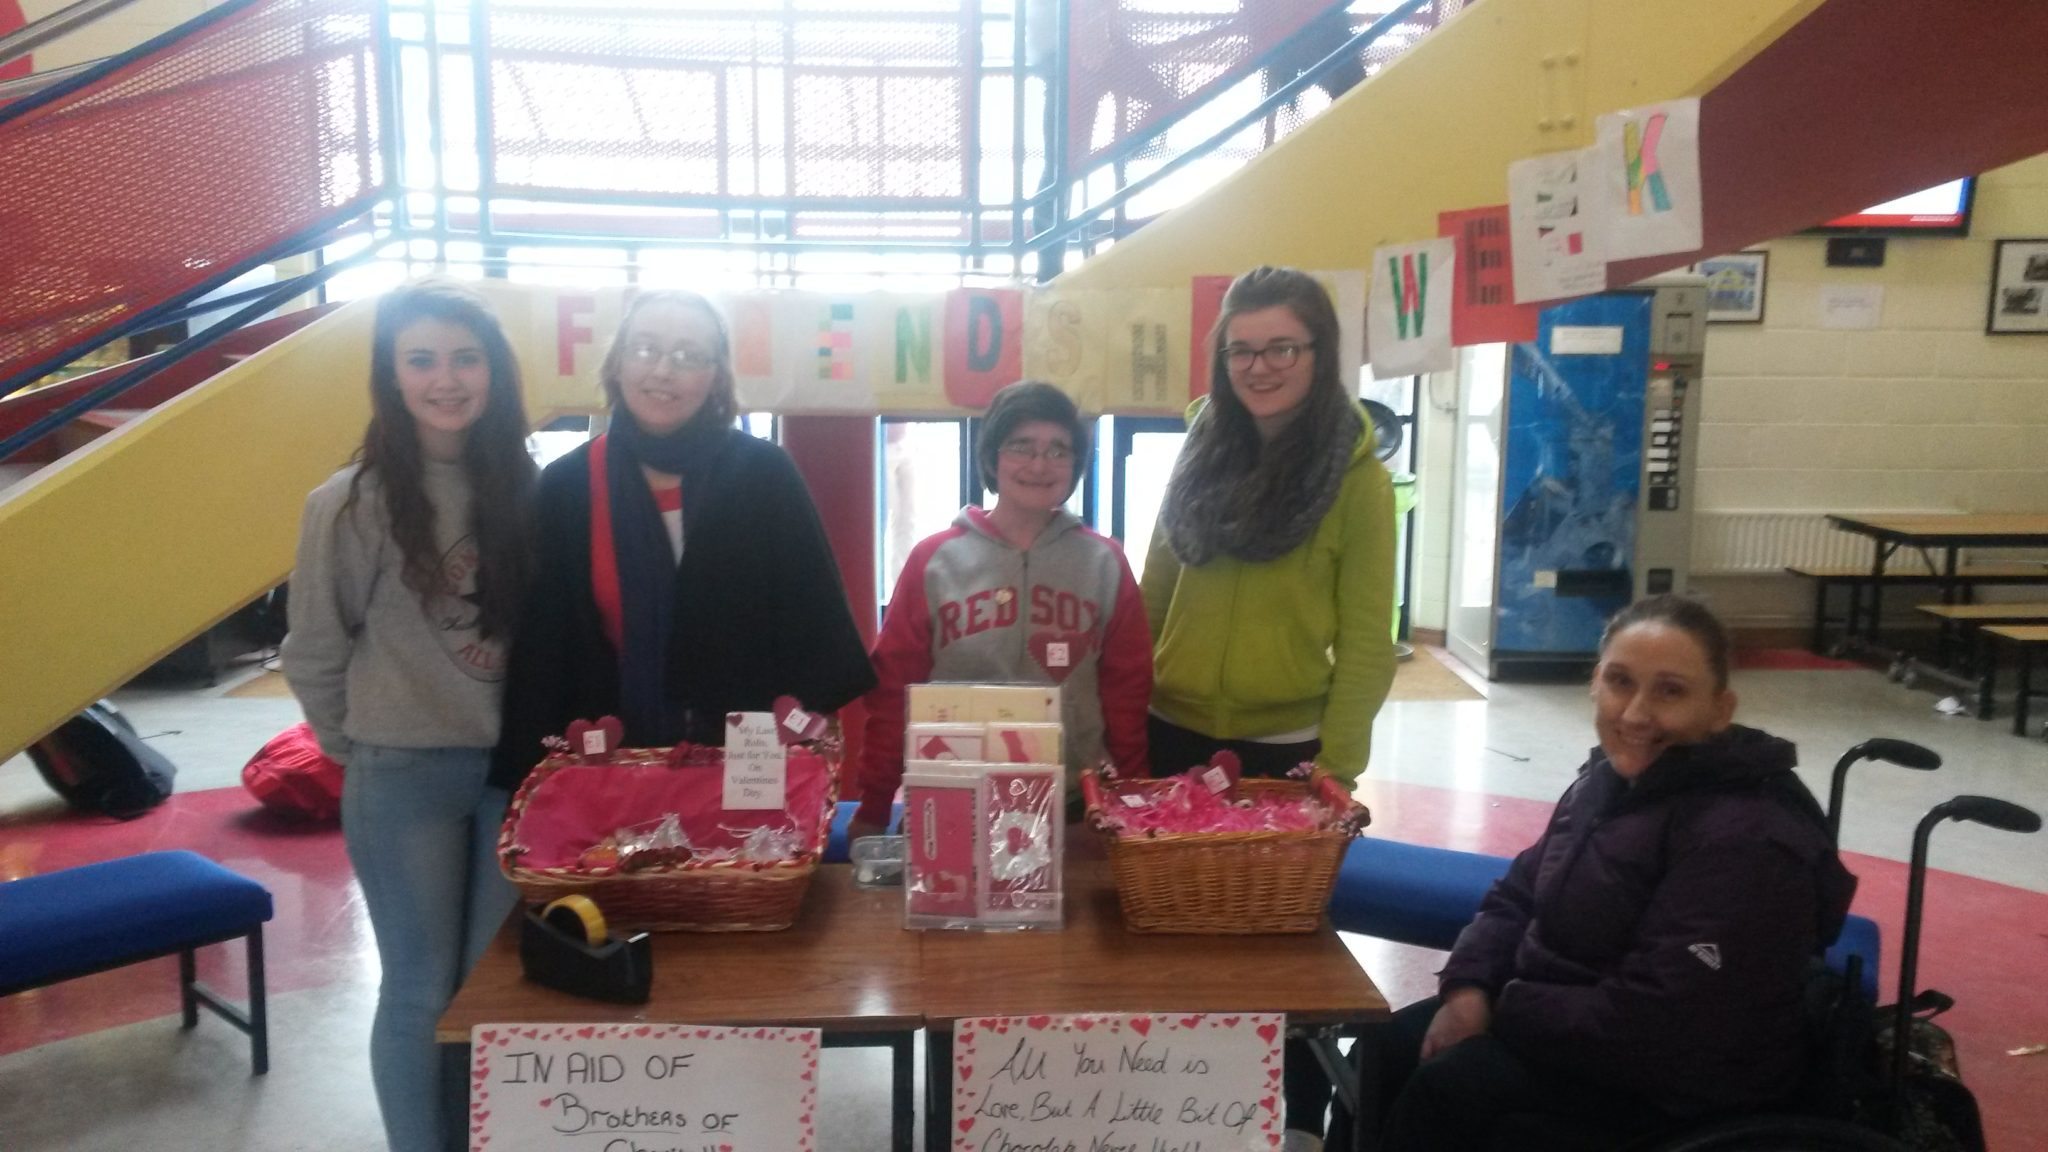 Pictured are Imelda Chalk, Mary McCann & Sinead o Mahony with Emma Herbert and Claire Mortell